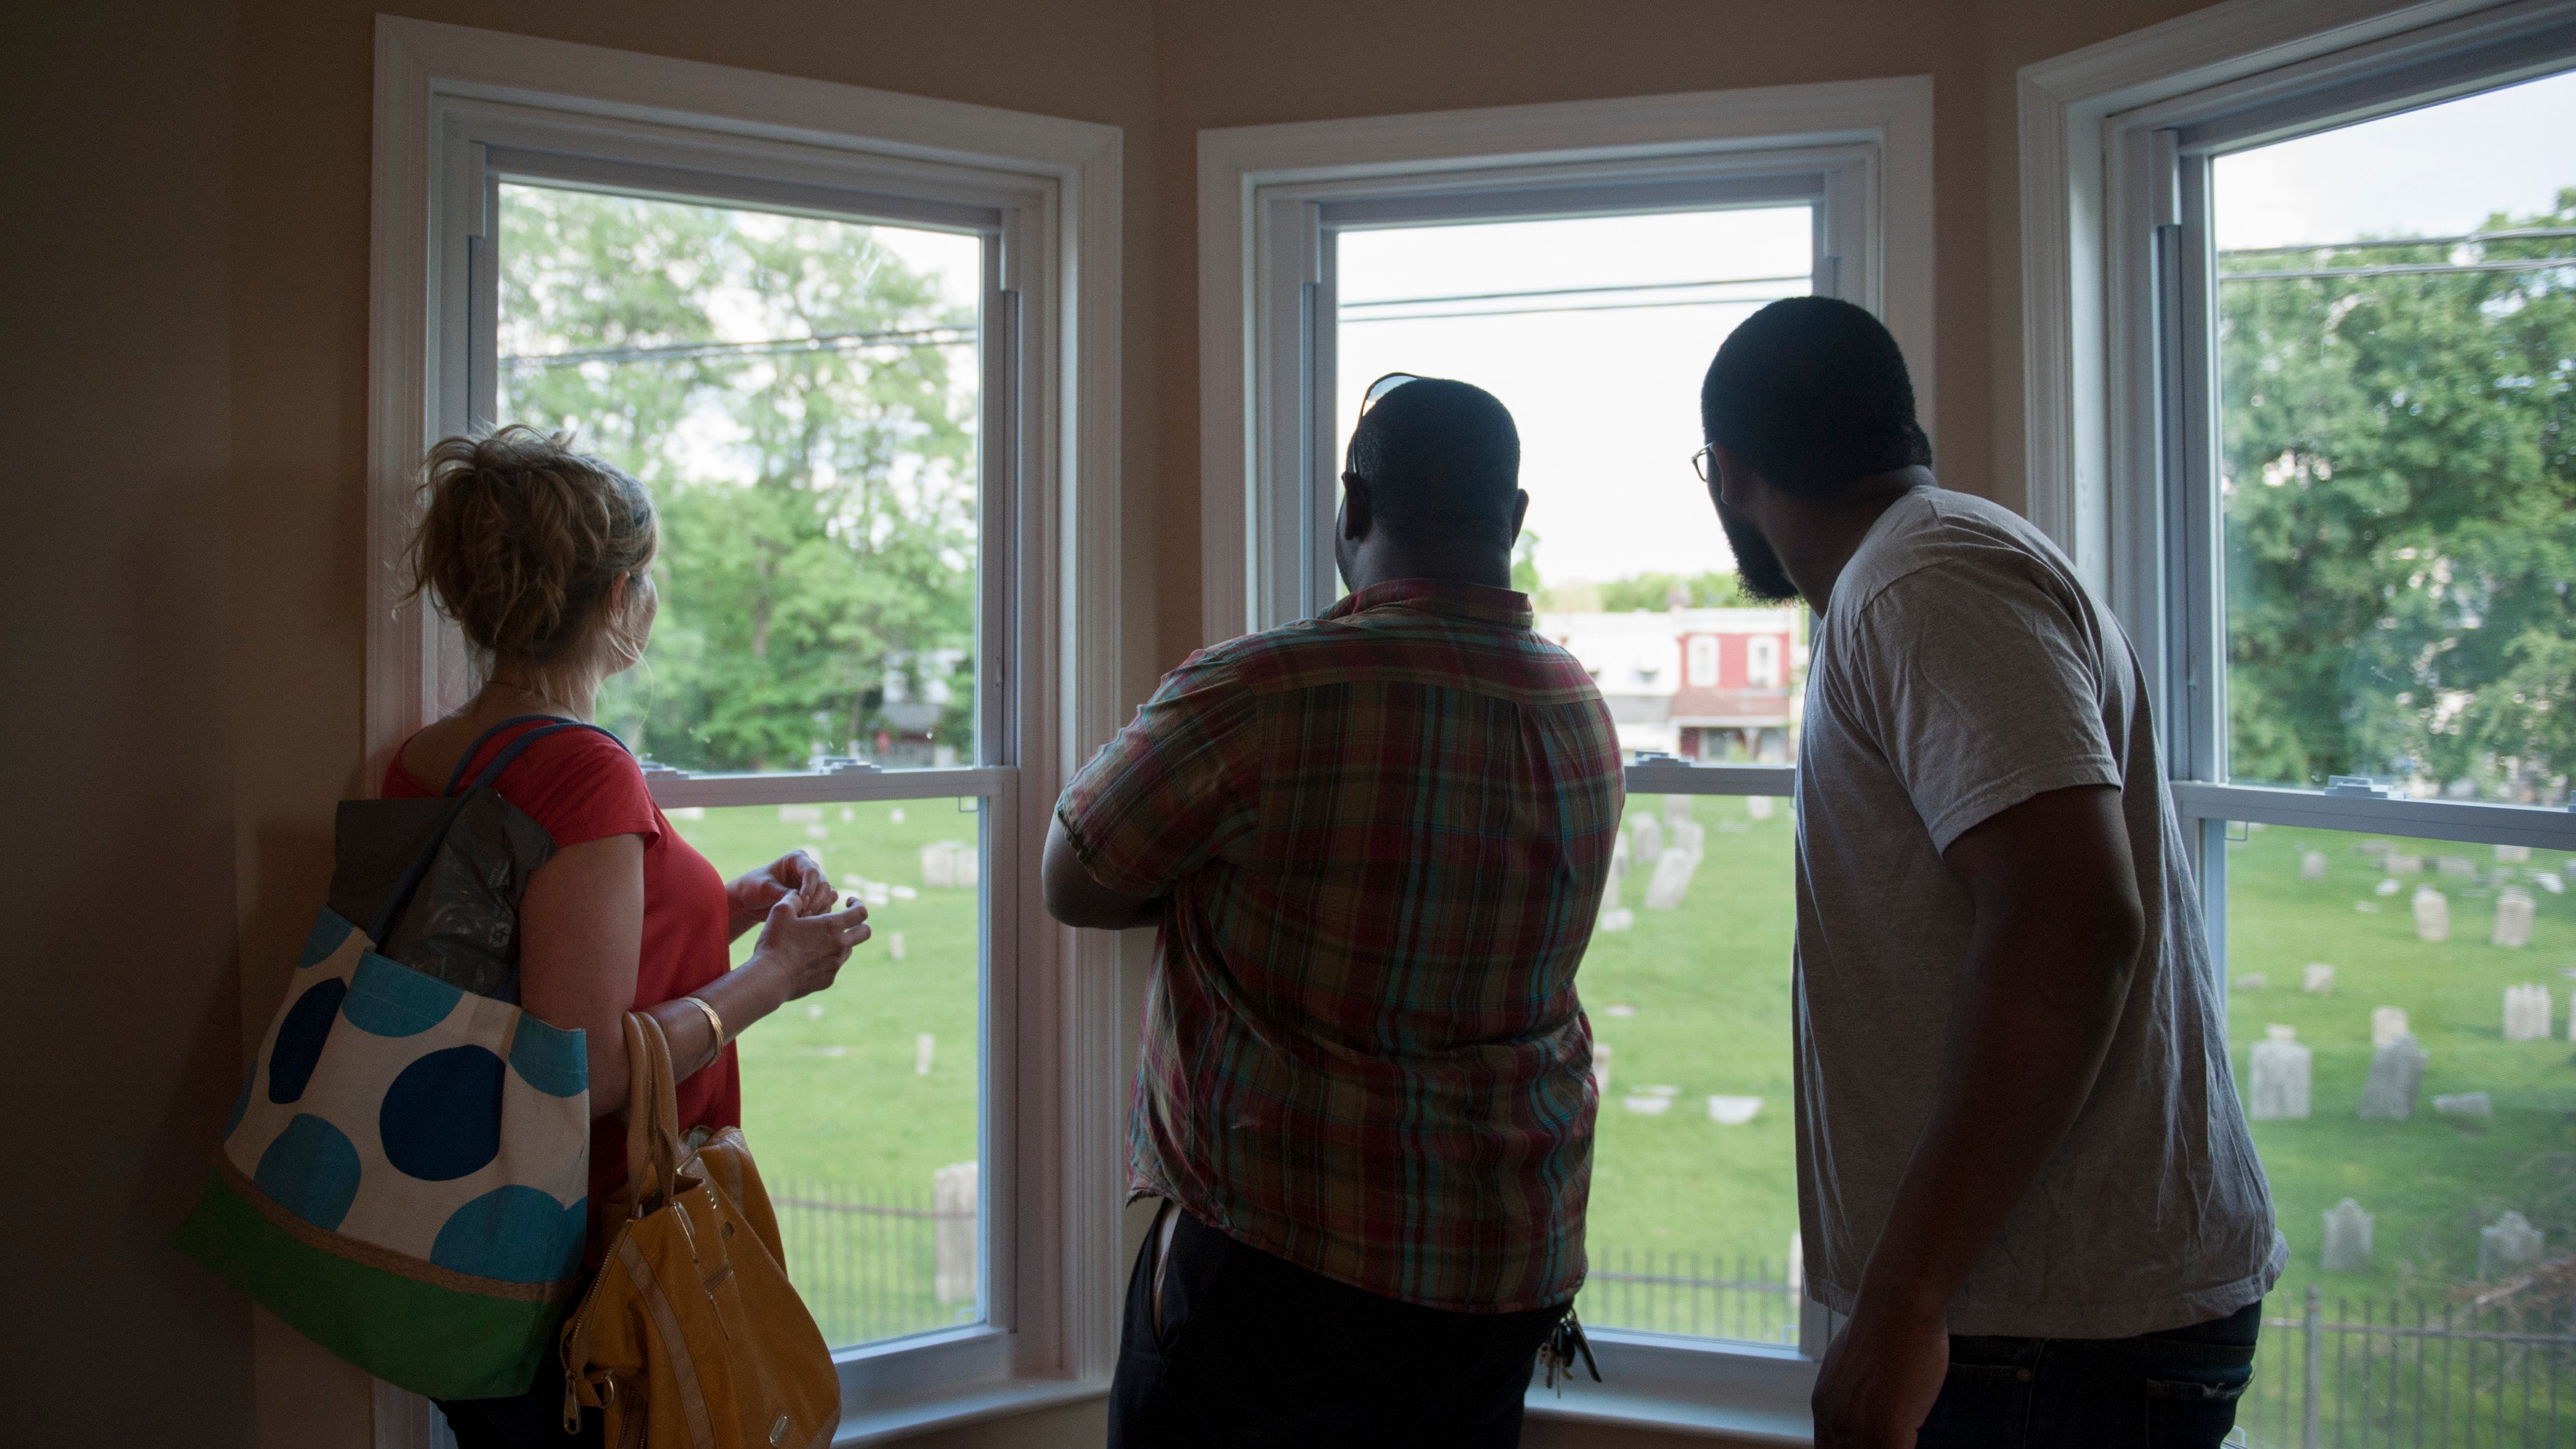 (From left) Elizabeth Mosell, of South Philadelphia, Jimmy Reed, of Mt. Airy, and Steven Halstead, of Mt. Airy, look out the windows in the master bedroom. Members of the Mt. Airy community were invited to view the newly renovated home at 59 E. Phil Ellena St. in Mt. Airy on Thursday evening, June 5, 2014. The property is the first to have been reclaimed by Mt. Airy USA under Pennsylvania's Conservatorship Act.